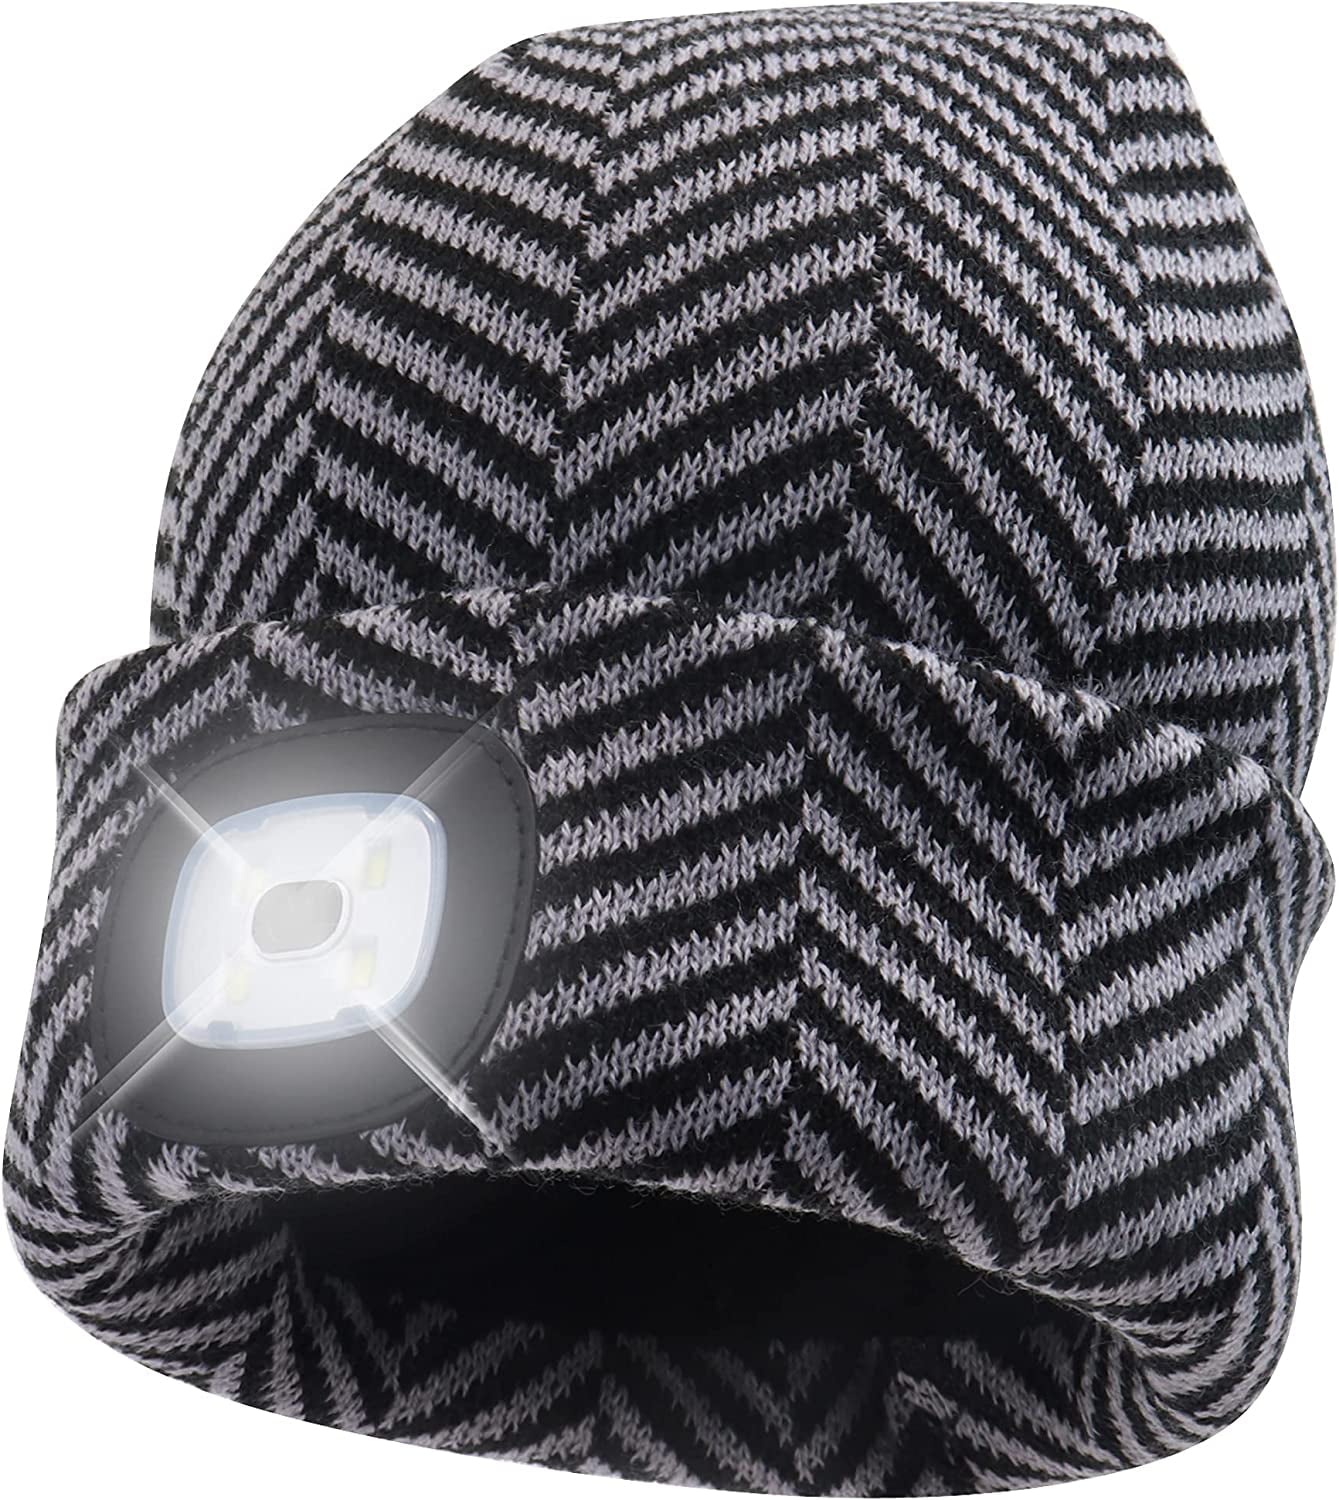 Beanie with Light, Warm Knit Hat for Winter Safety, Unisex LED Hat Light  Fits Most Men, Women and Kids, LED Beanie Hat Flashlight Stocking Cap  Headlamp, Head Light for Outdoor Dog Walking